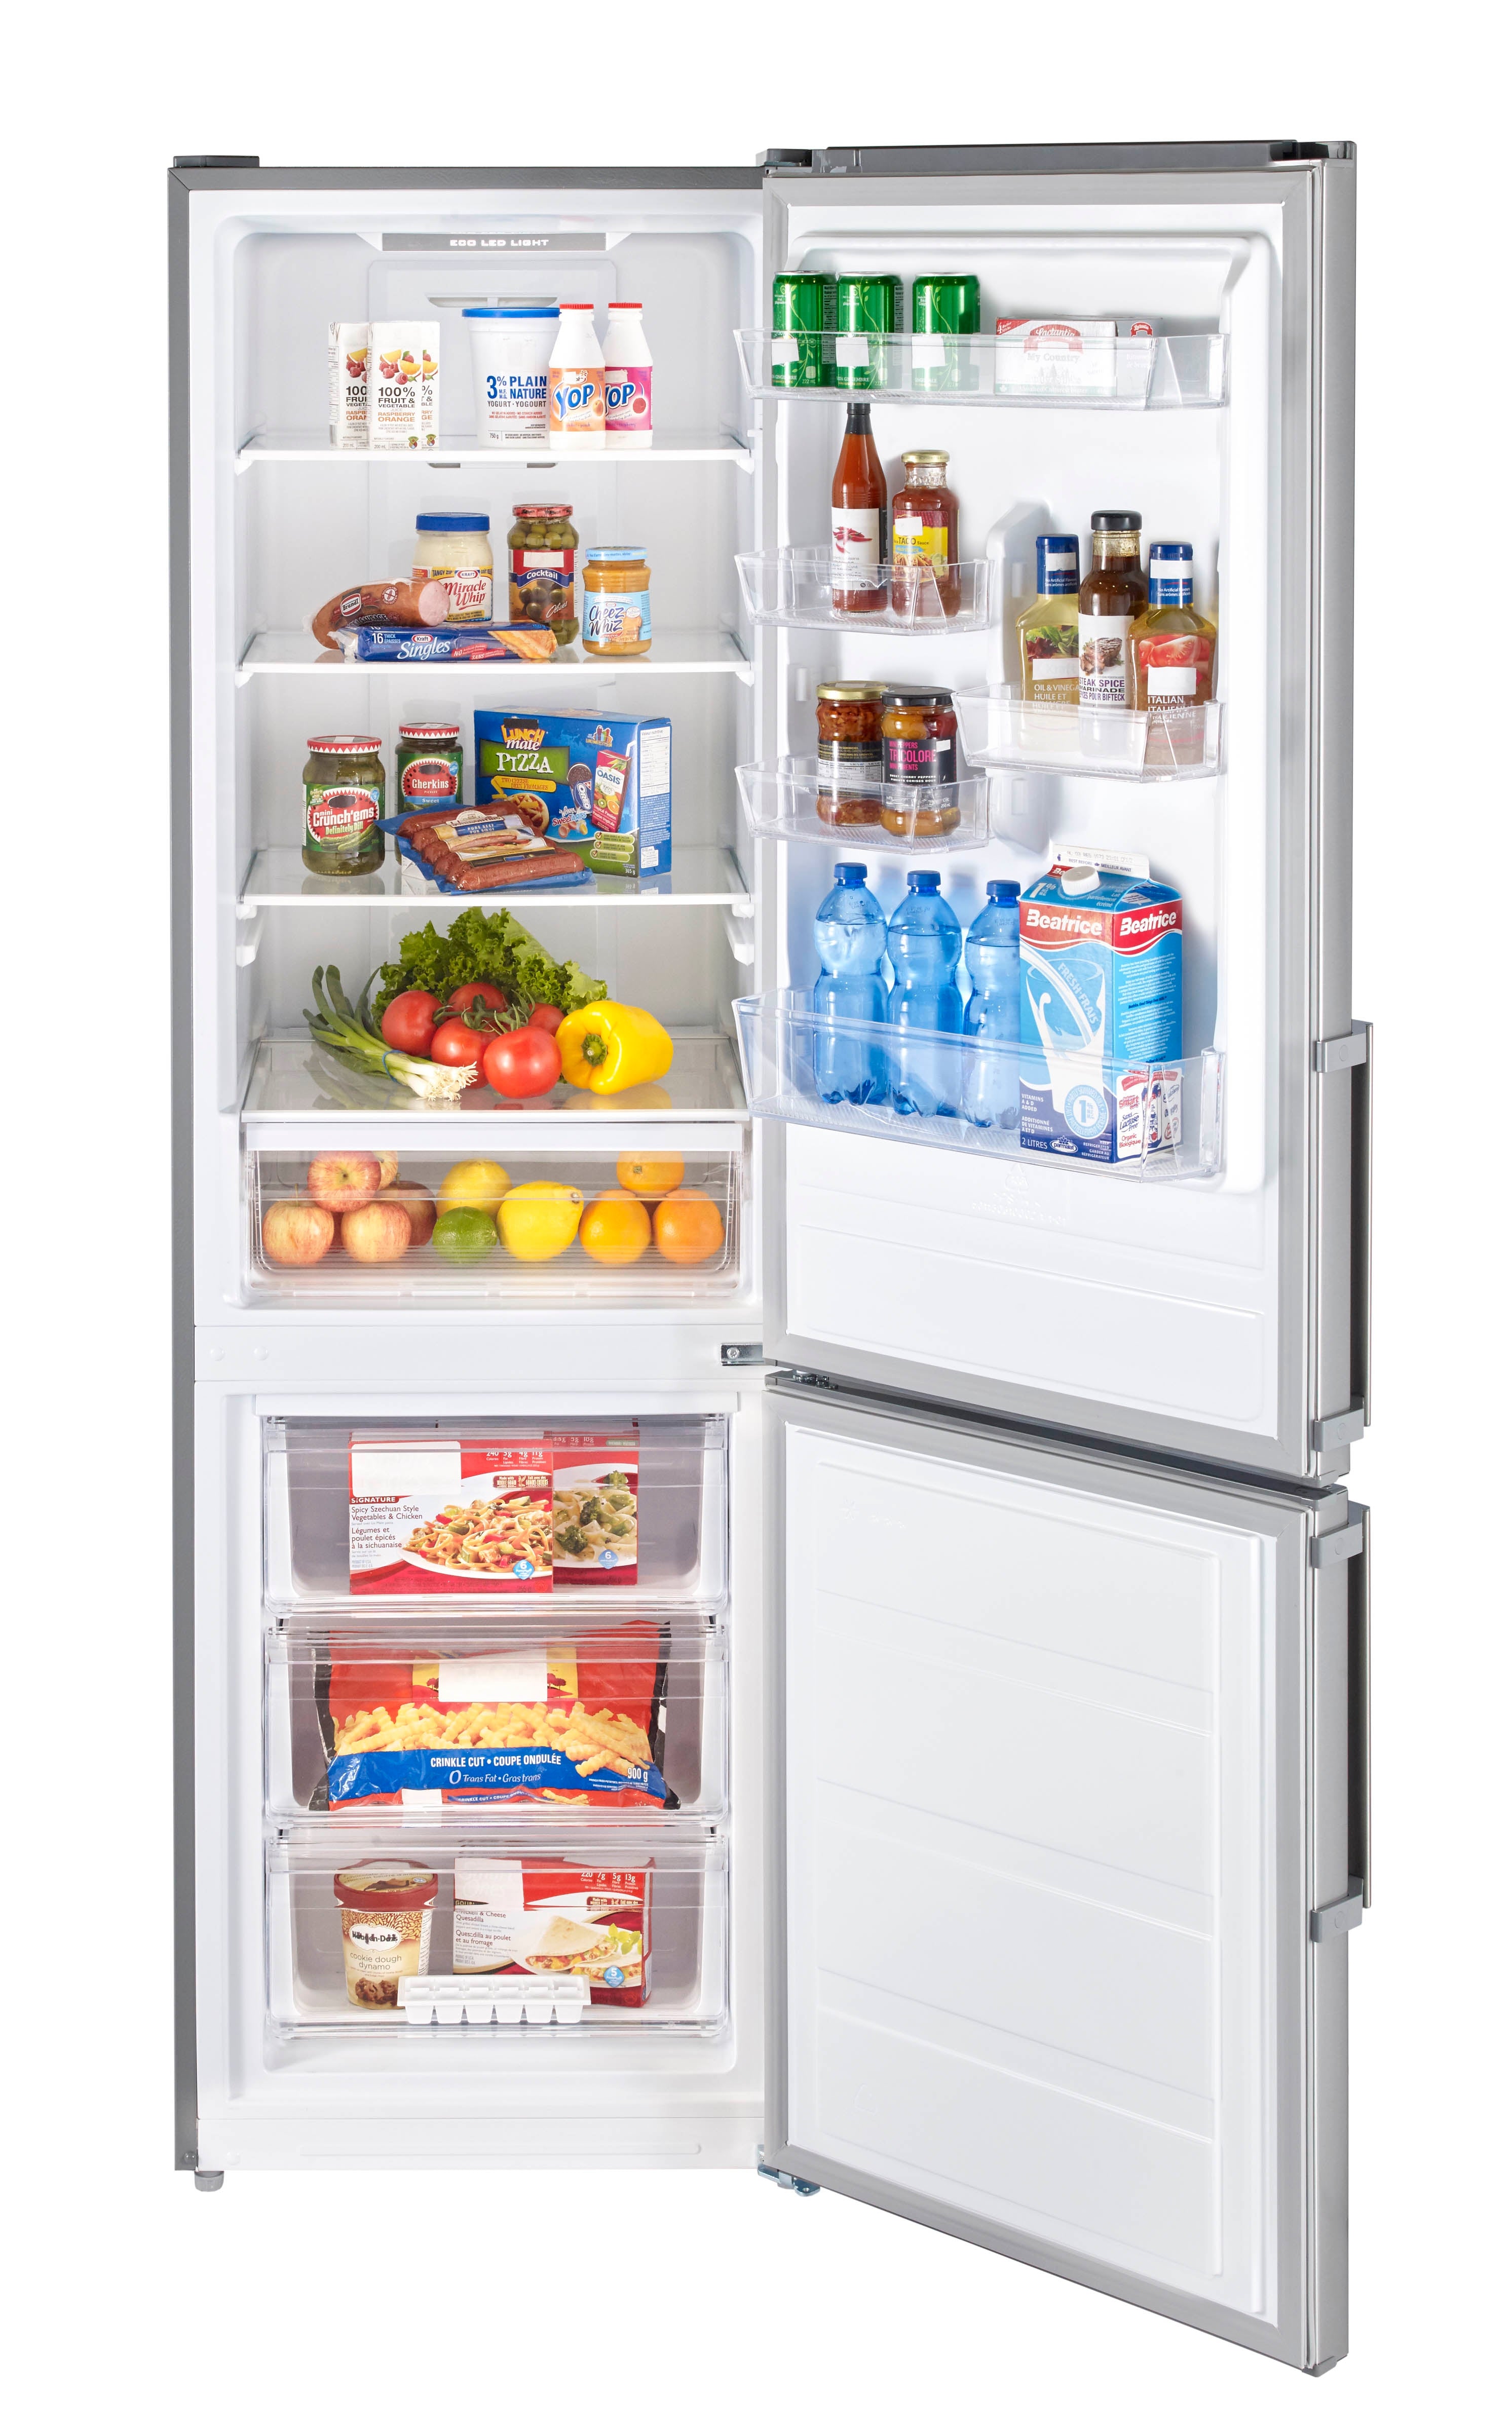 GE - 23.5 Inch 23.5 cu. ft French Door Refrigerator in Stainless - MBE11DSLSS